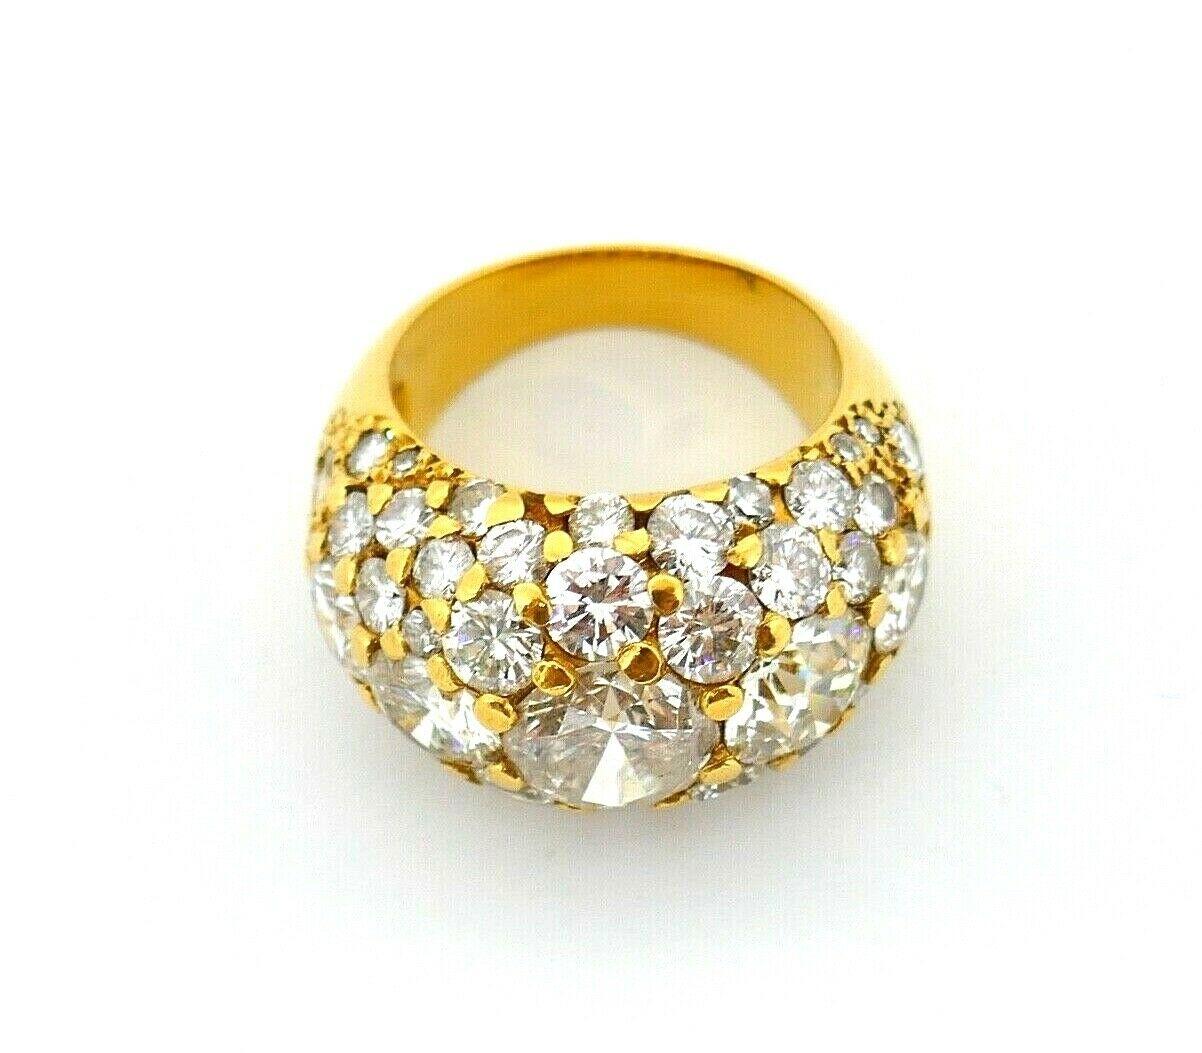 Vintage 14k yellow gold diamond cocktail dome ring. All diamonds are Old European cut, H-I color, SI2 clarity. Center diamond is 1.30-1.40 cts, two side diamonds are about 0.80 points each. Smaller two side diamonds are  0.40 points each. For the